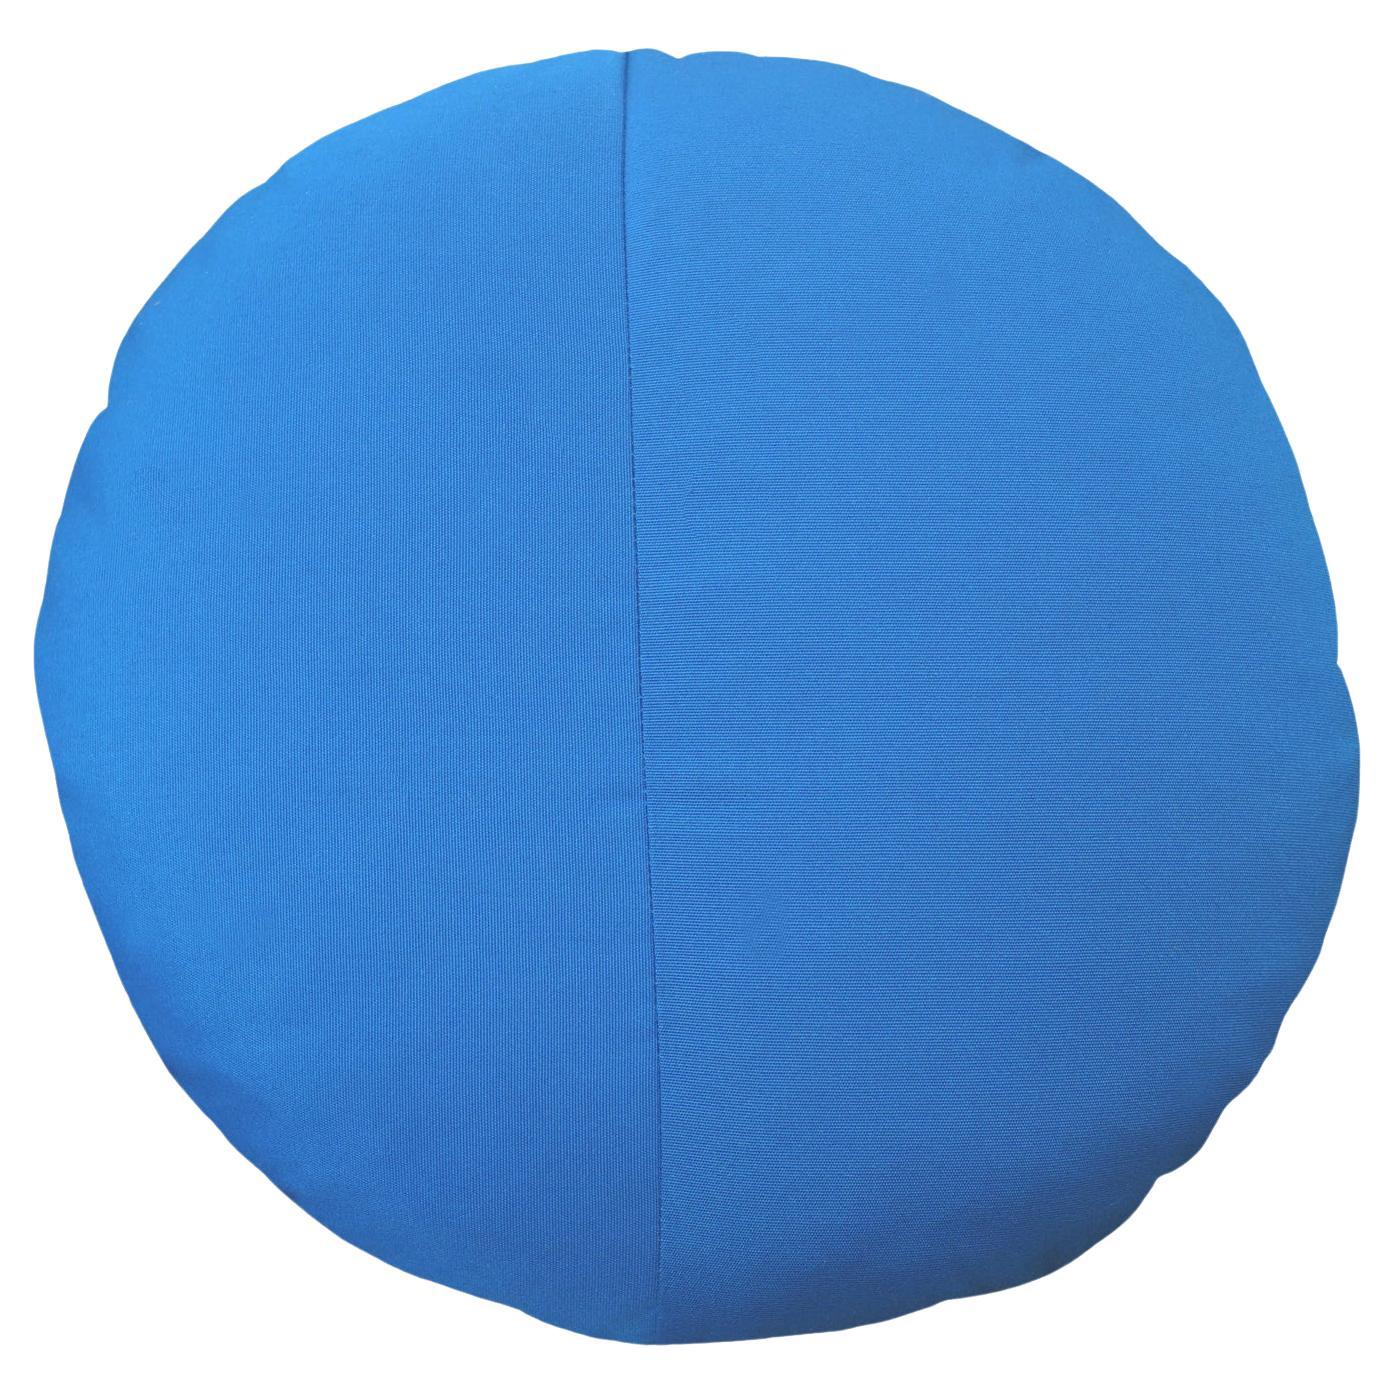 Bend Goods - Round Throw Pillow in Pacific Blue Sunbrella For Sale